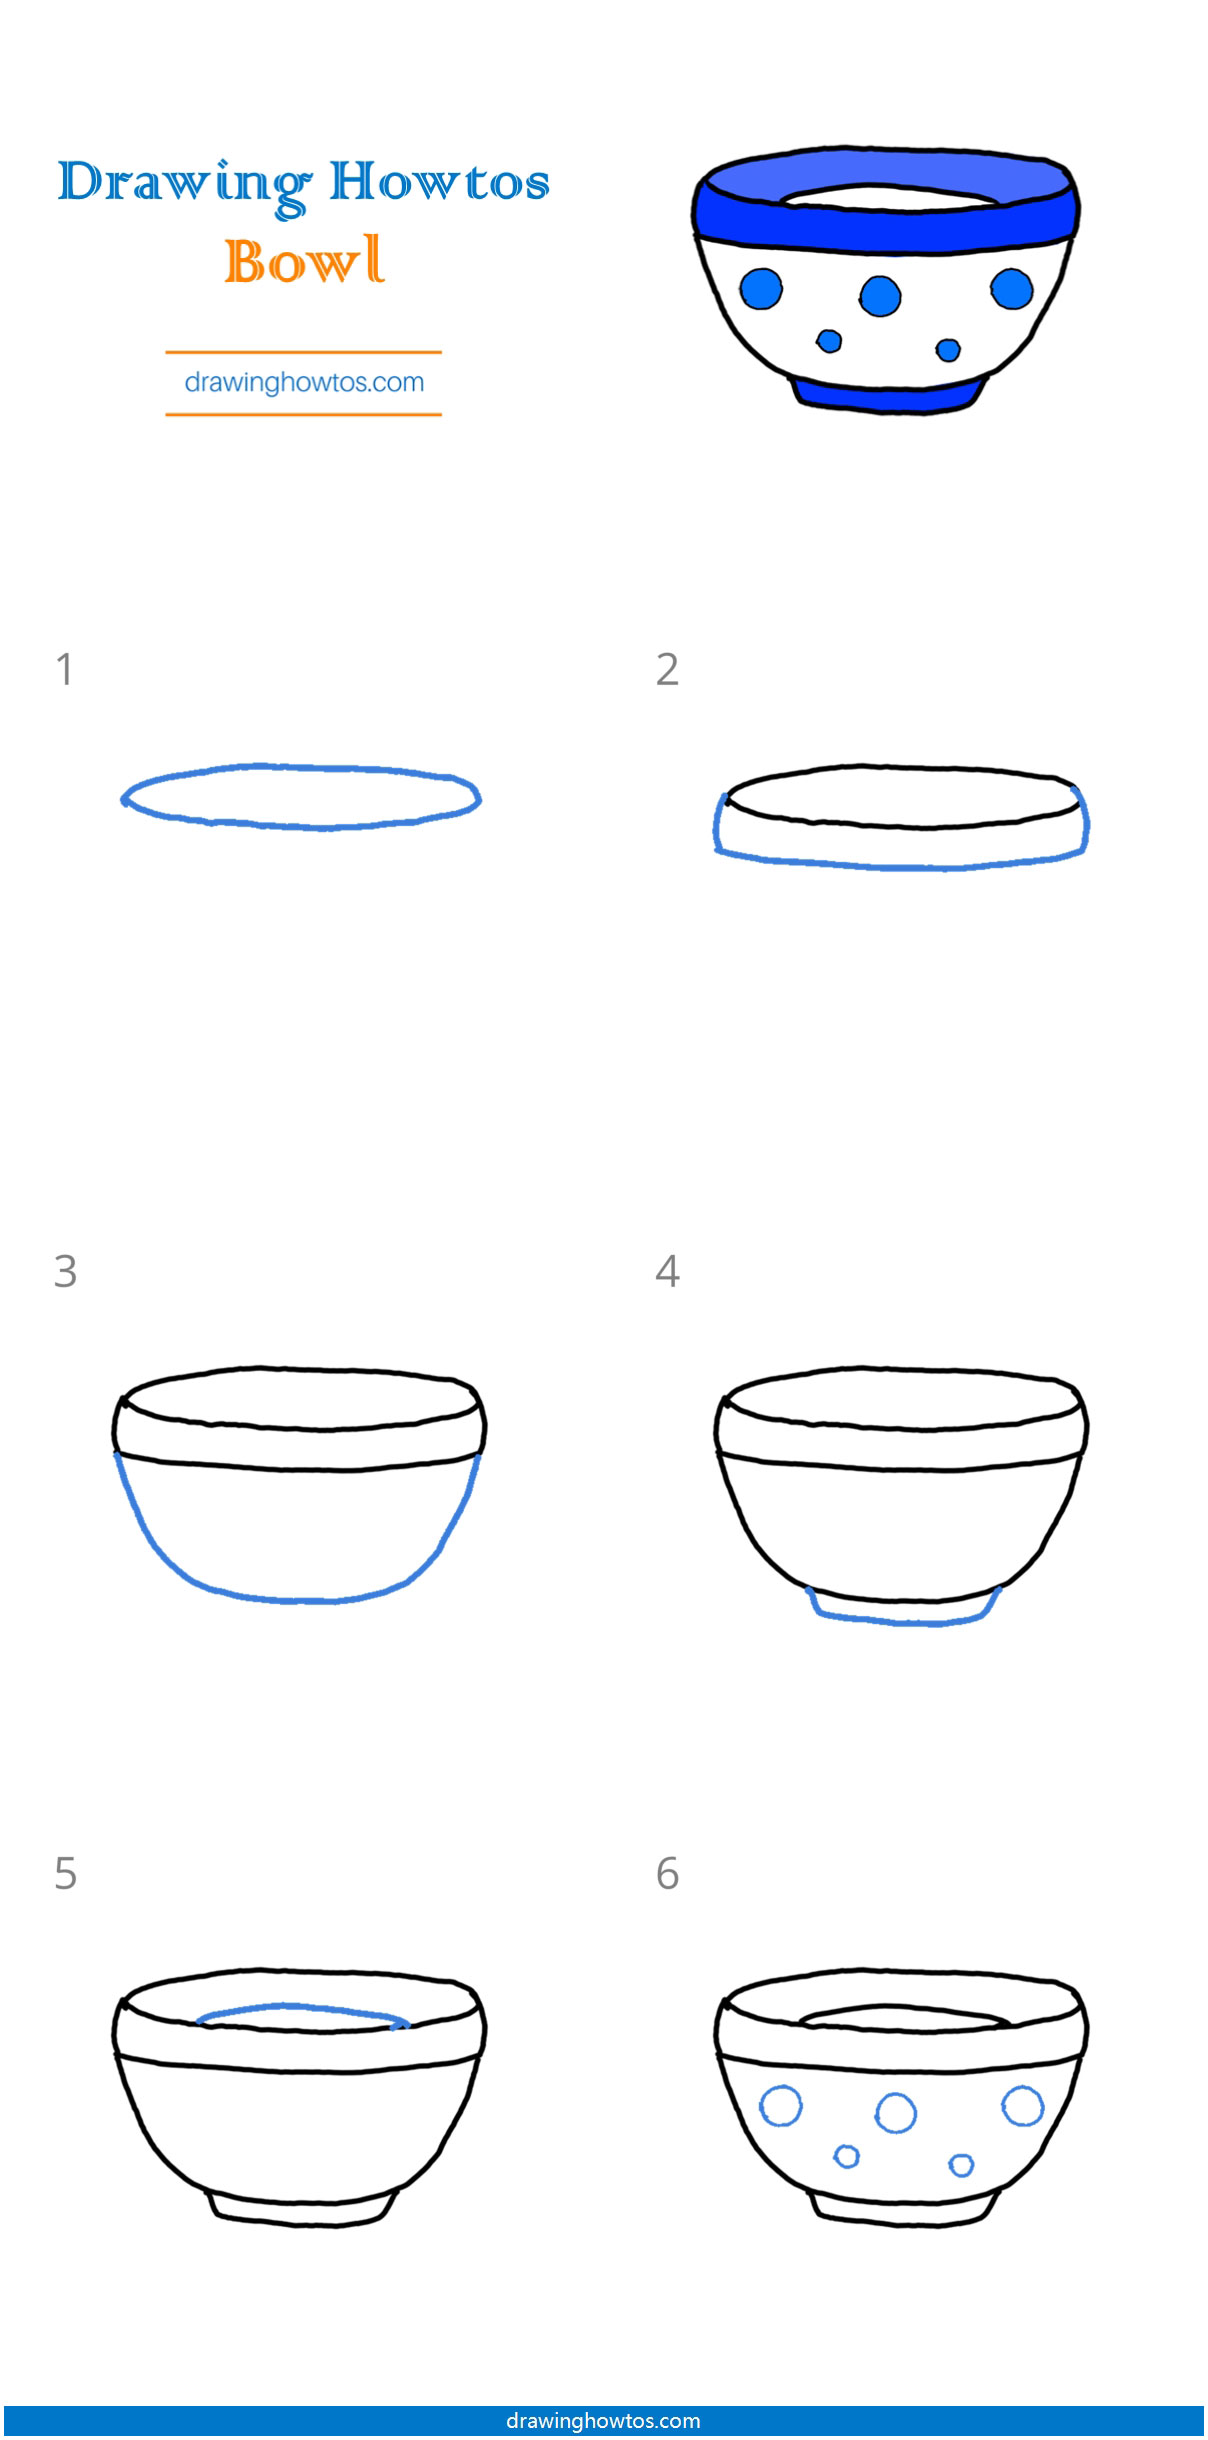 How to Draw a Bowl Step by Step